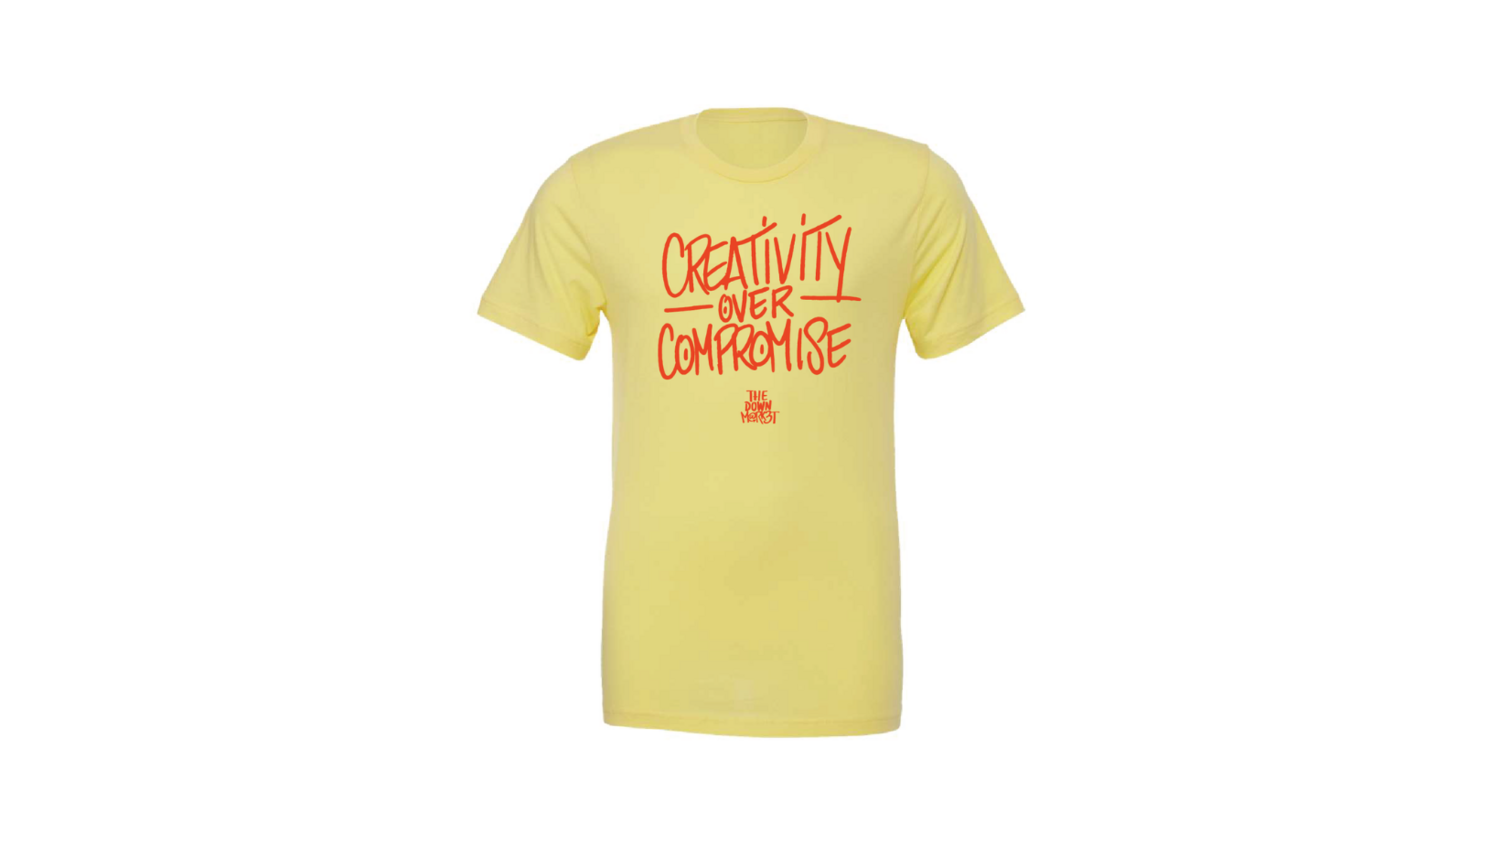 Creativity Over Compromise Tee